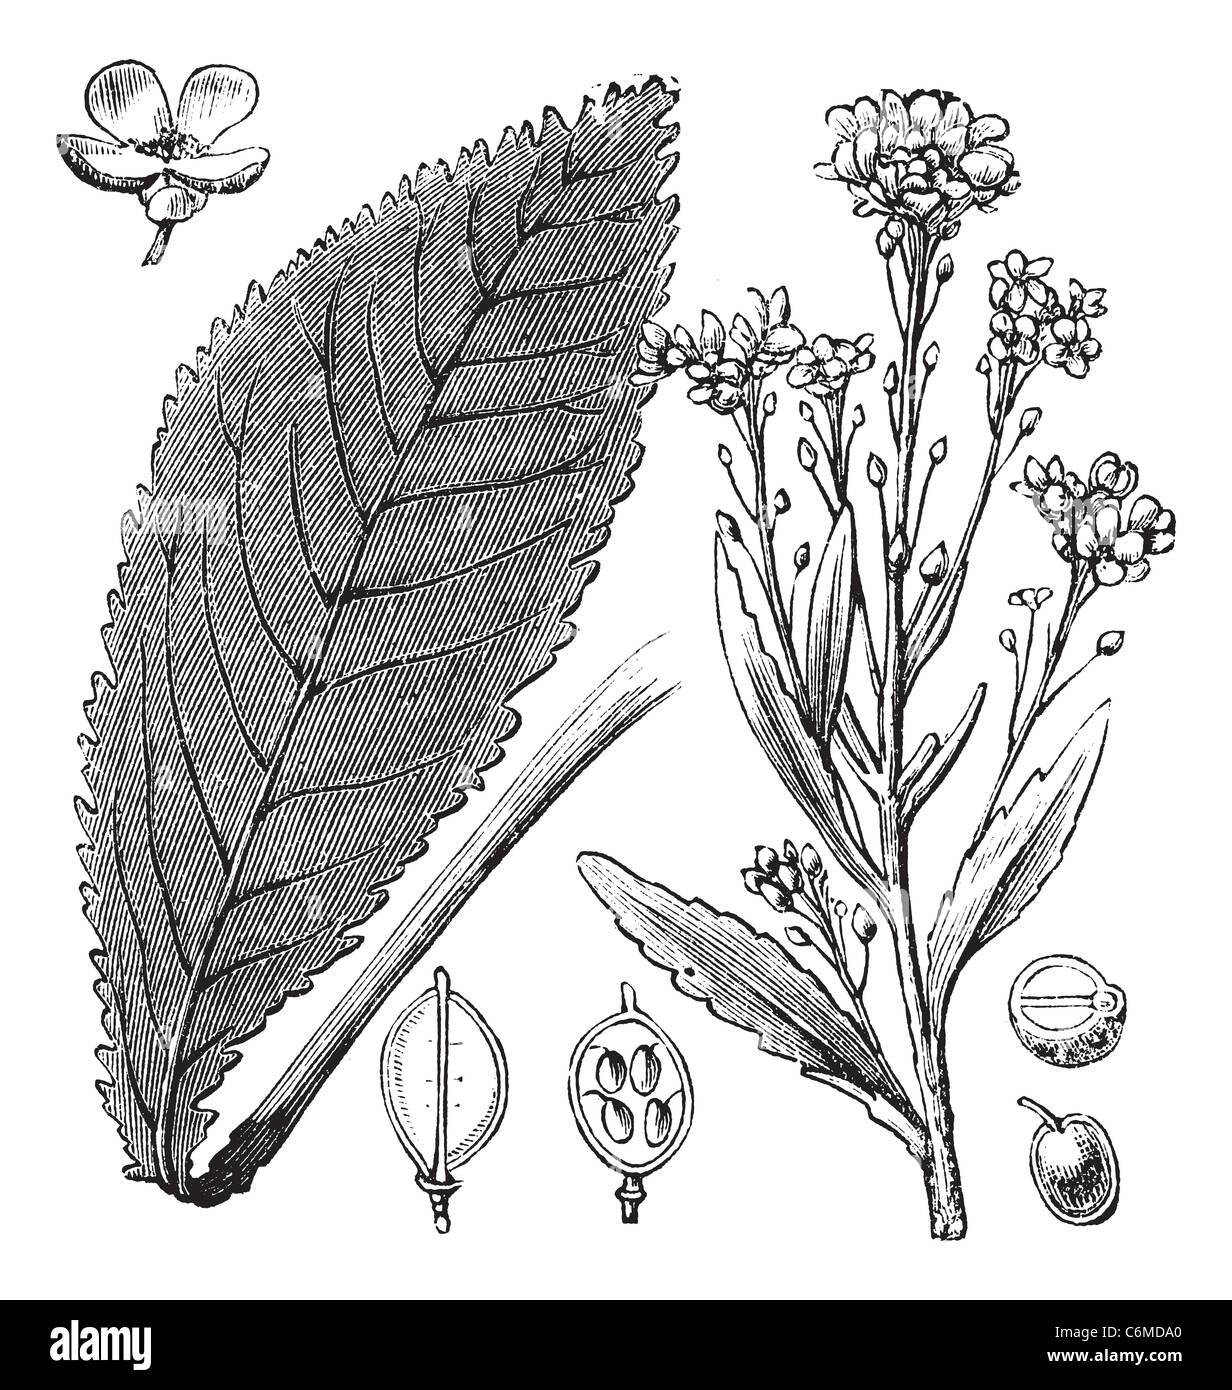 Scurvy-grass or Scurvy Grass or Scurvygrass or Spoonwort or Cochlearia sp., vintage engraving. Old engraved illustration of Scur Stock Photo